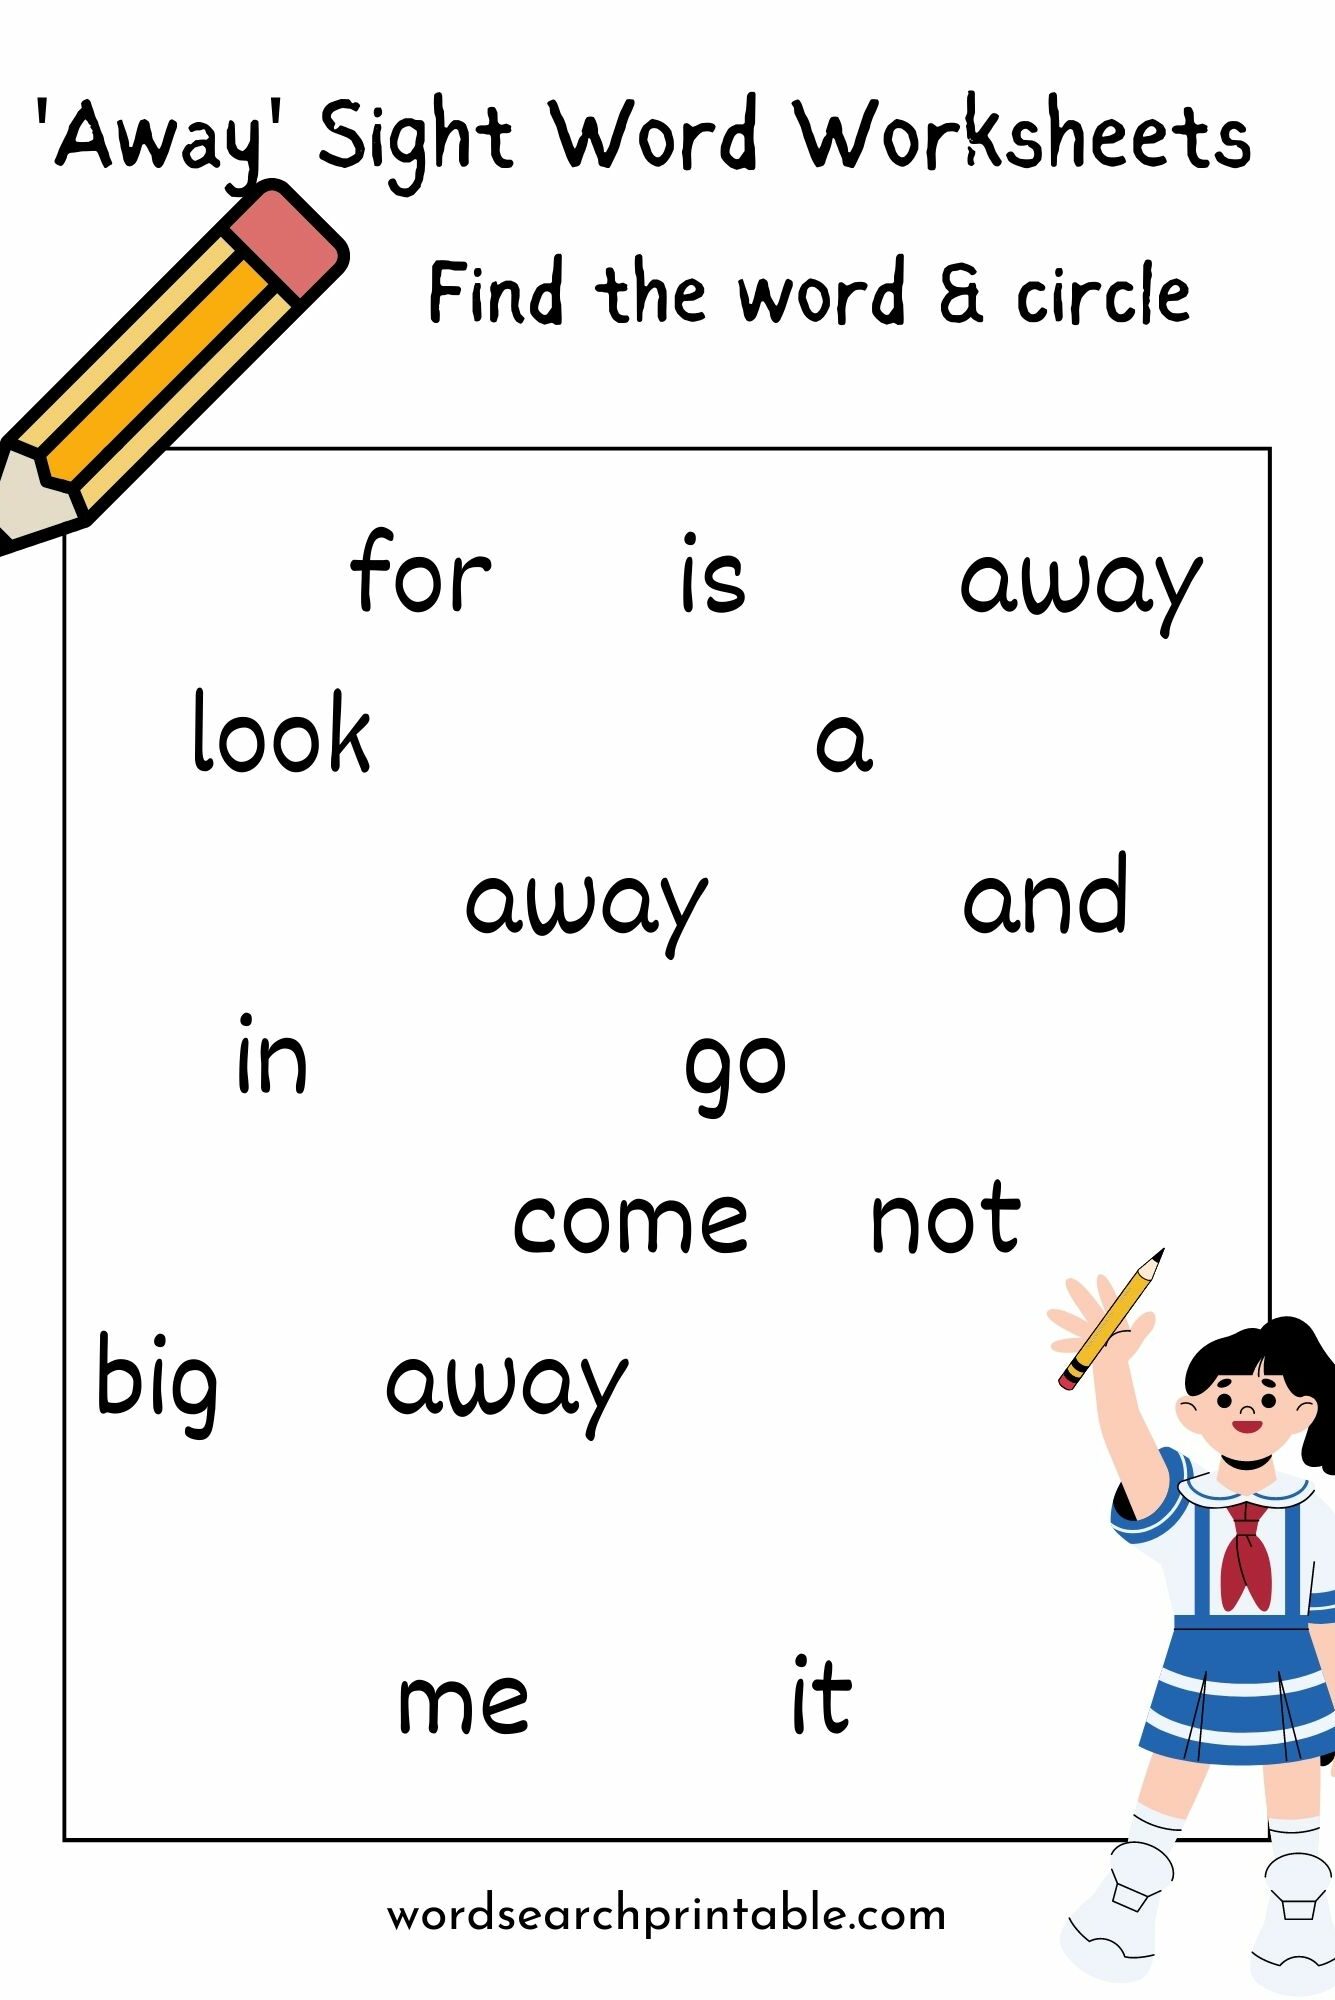 Find the word “Away” and circle it